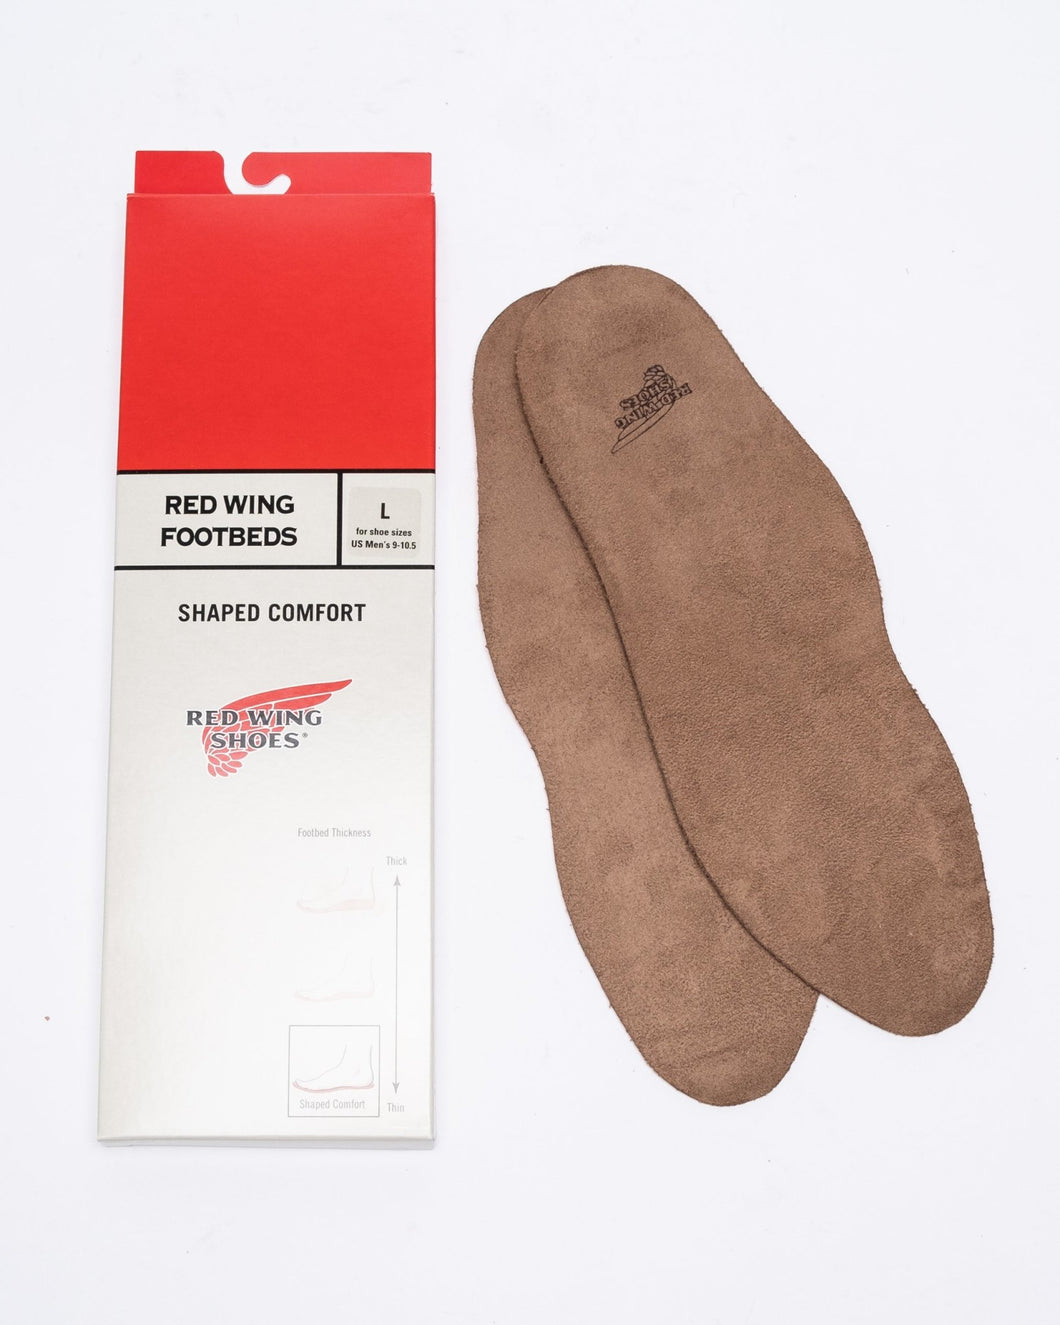 Shaped Comfort Footbeds by Red Wing Shoes ▶️